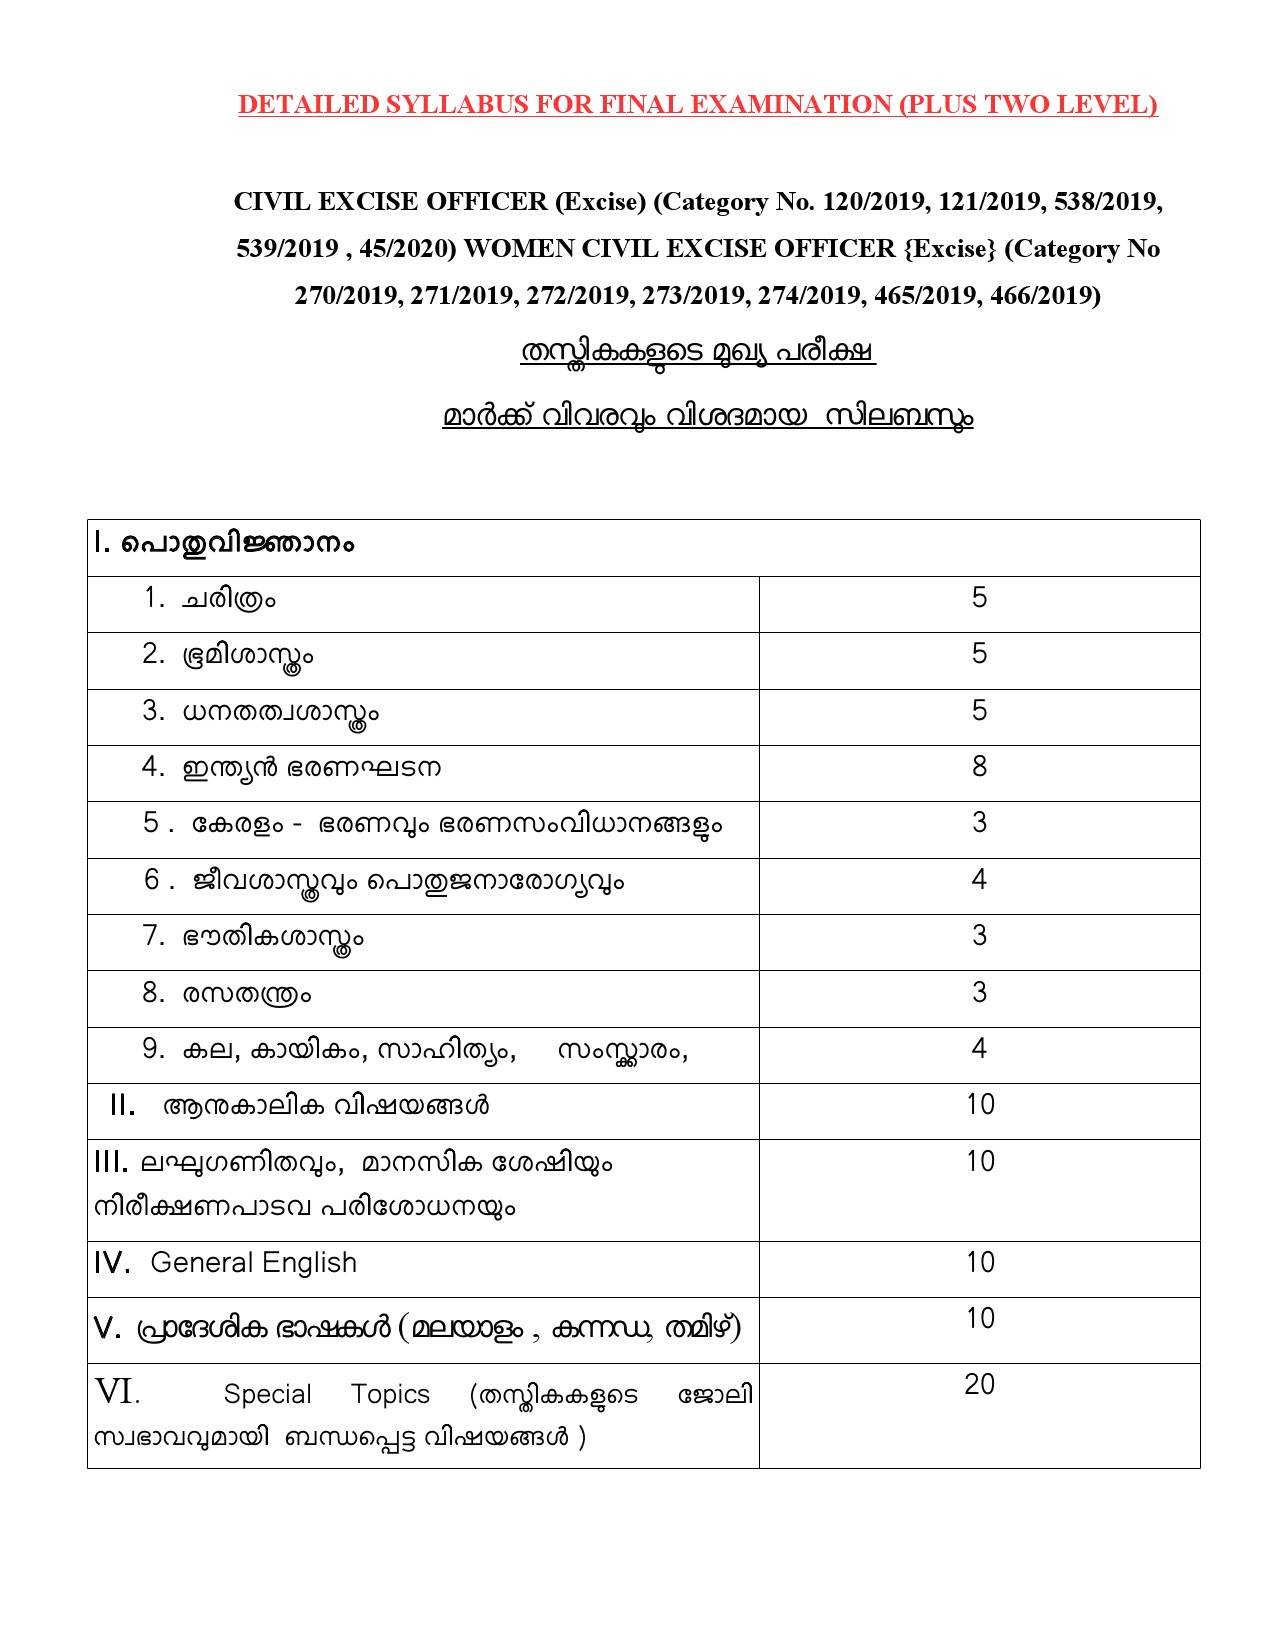 Civil Excise Officer Final Examination Syllabus For Plus Two Level - Notification Image 1